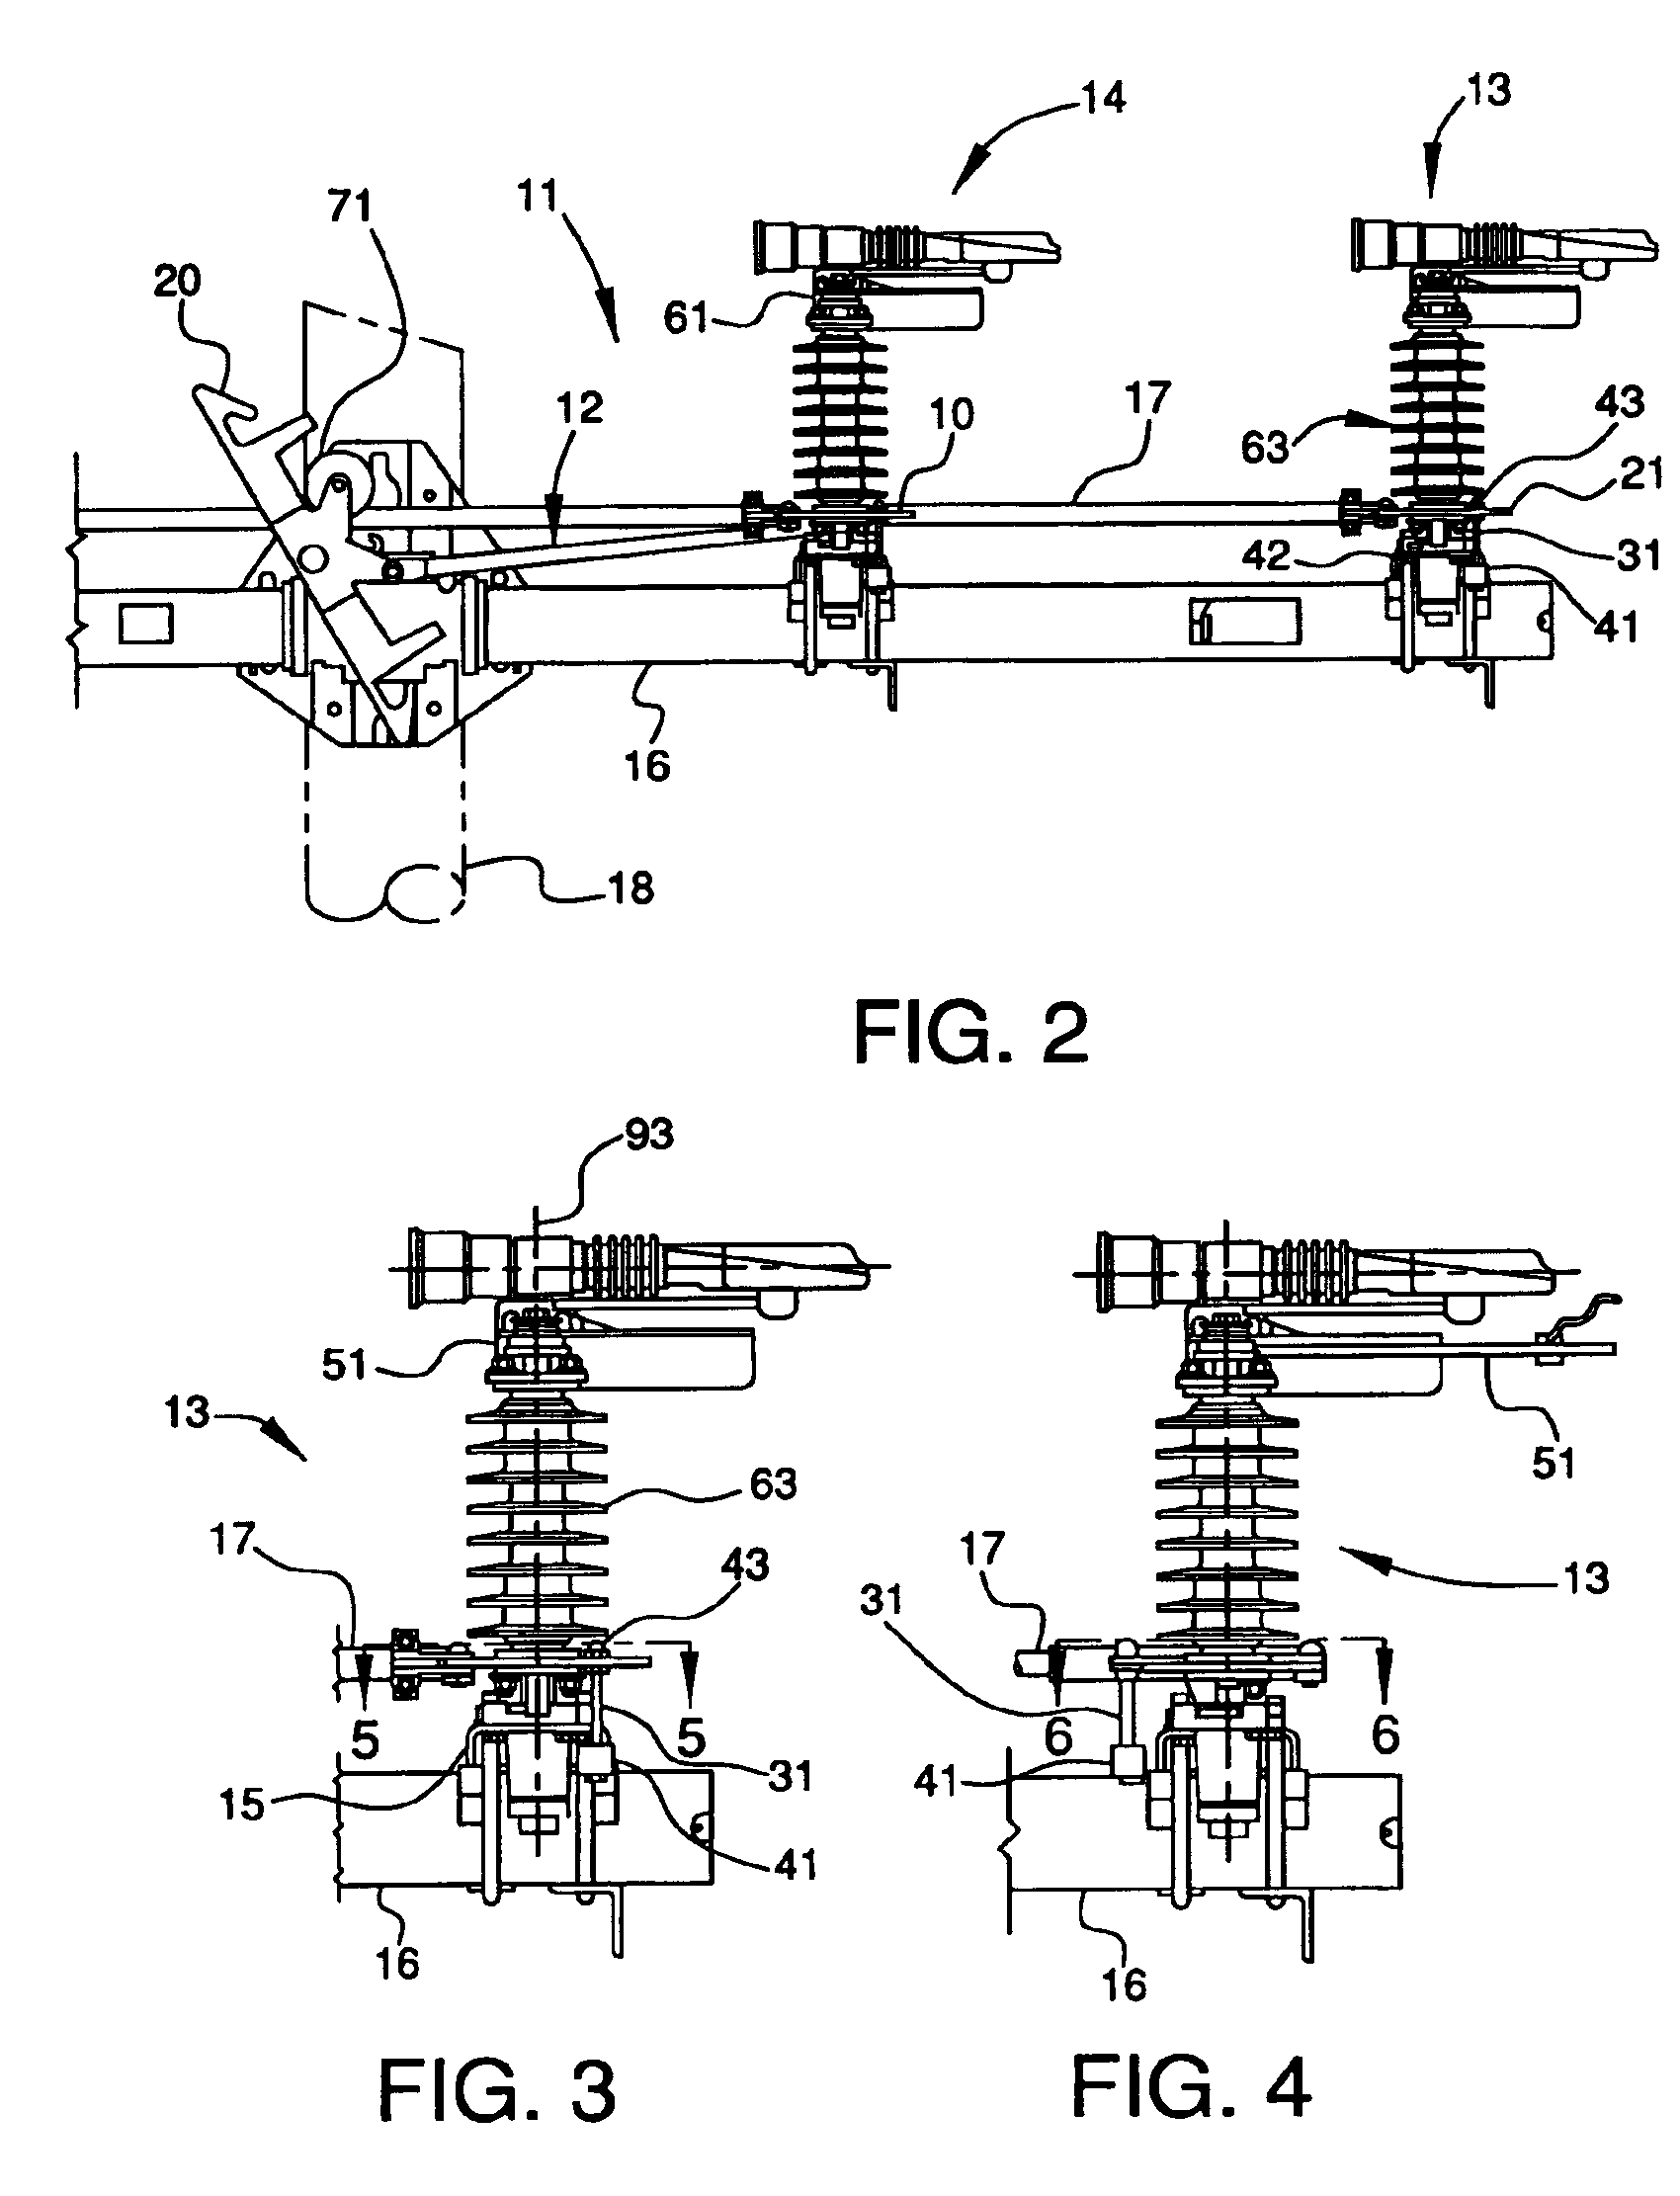 Resistance assembly for hookstick operated switching assembly